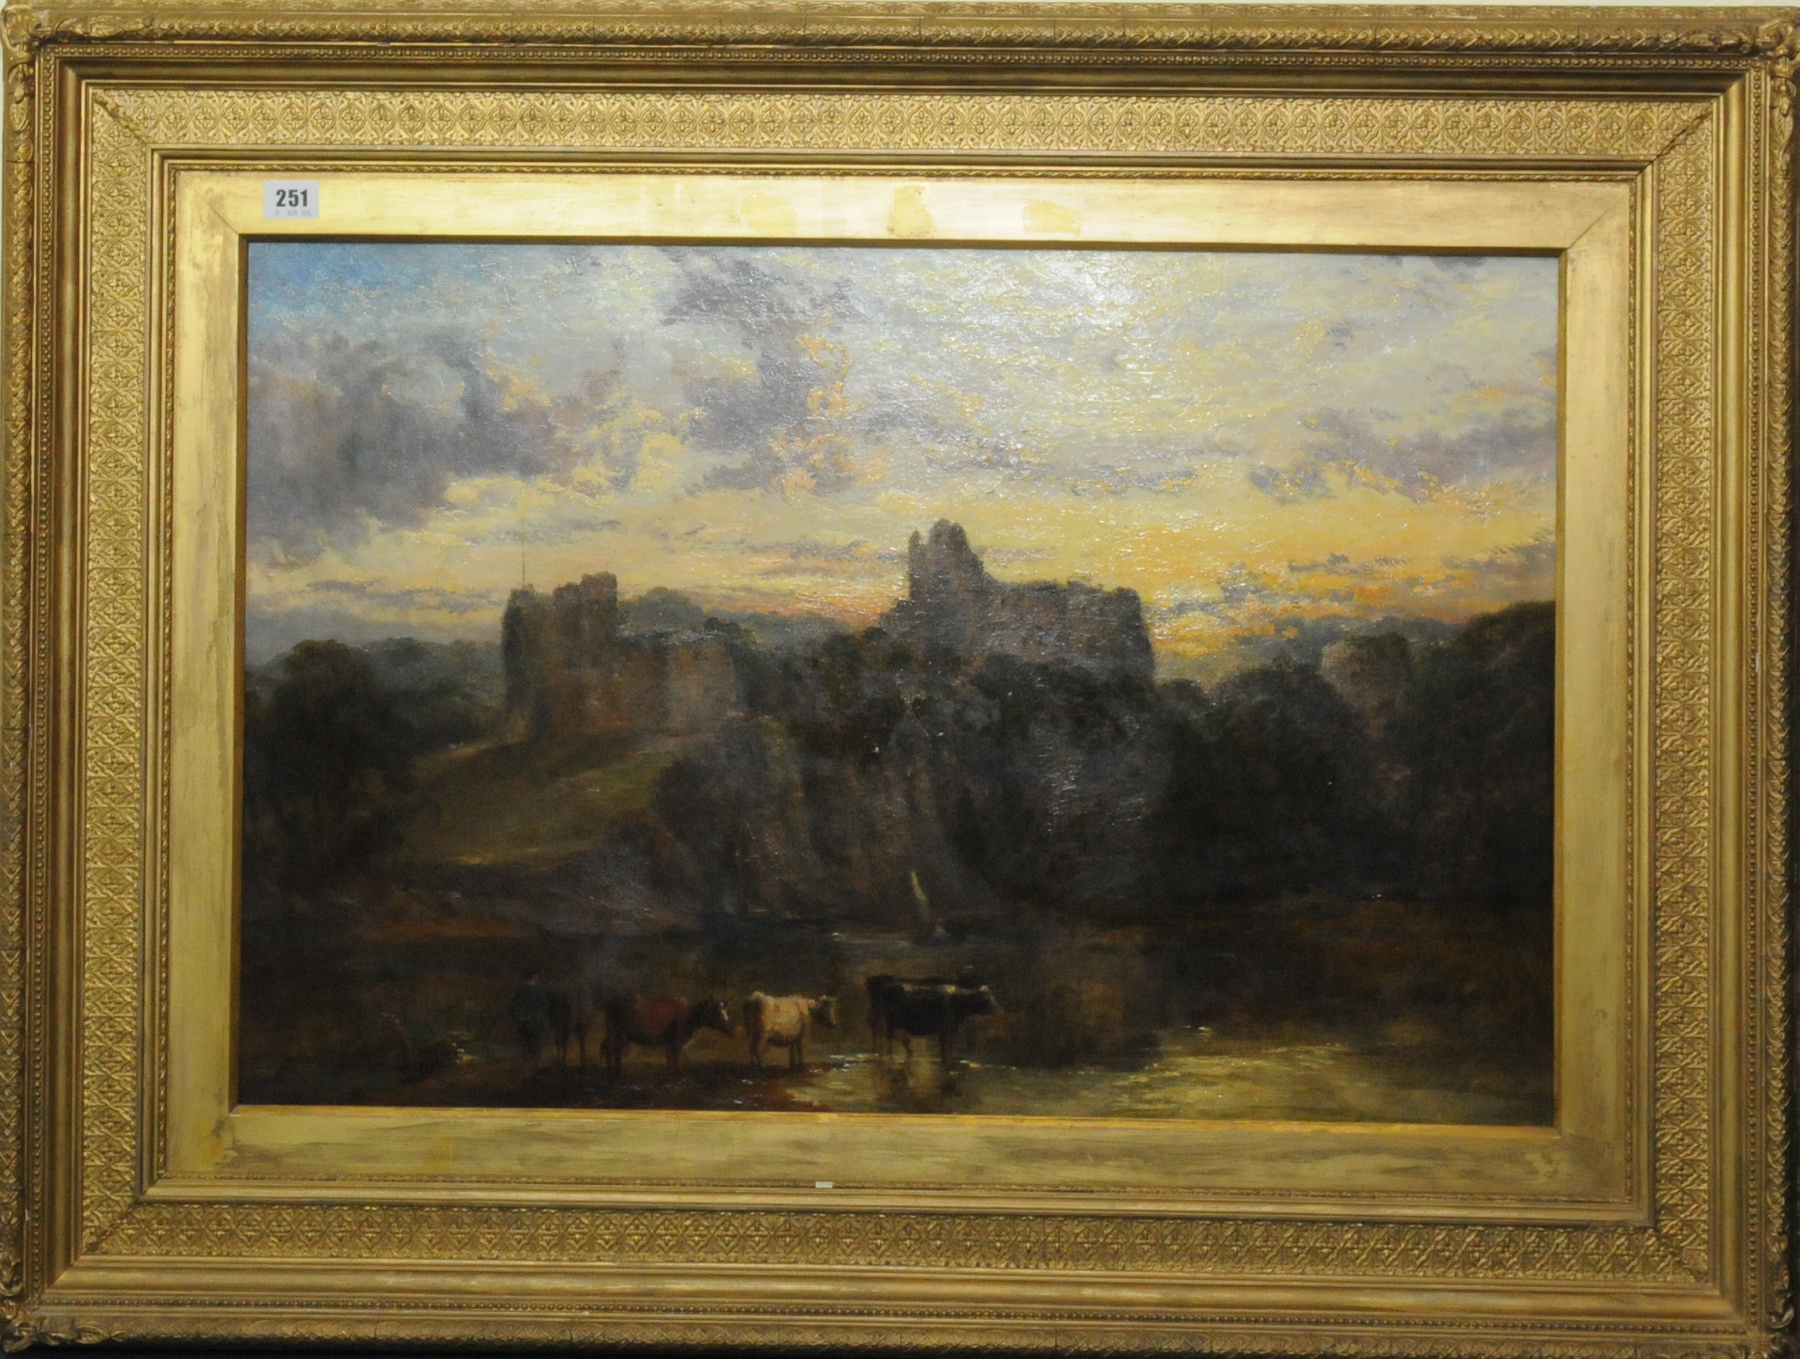 THOMAS WHITTLE.
"Chepstow Castle, sunset on the Wye, Monmouthshire".
Oil on canvas. 19¼" x 29½".